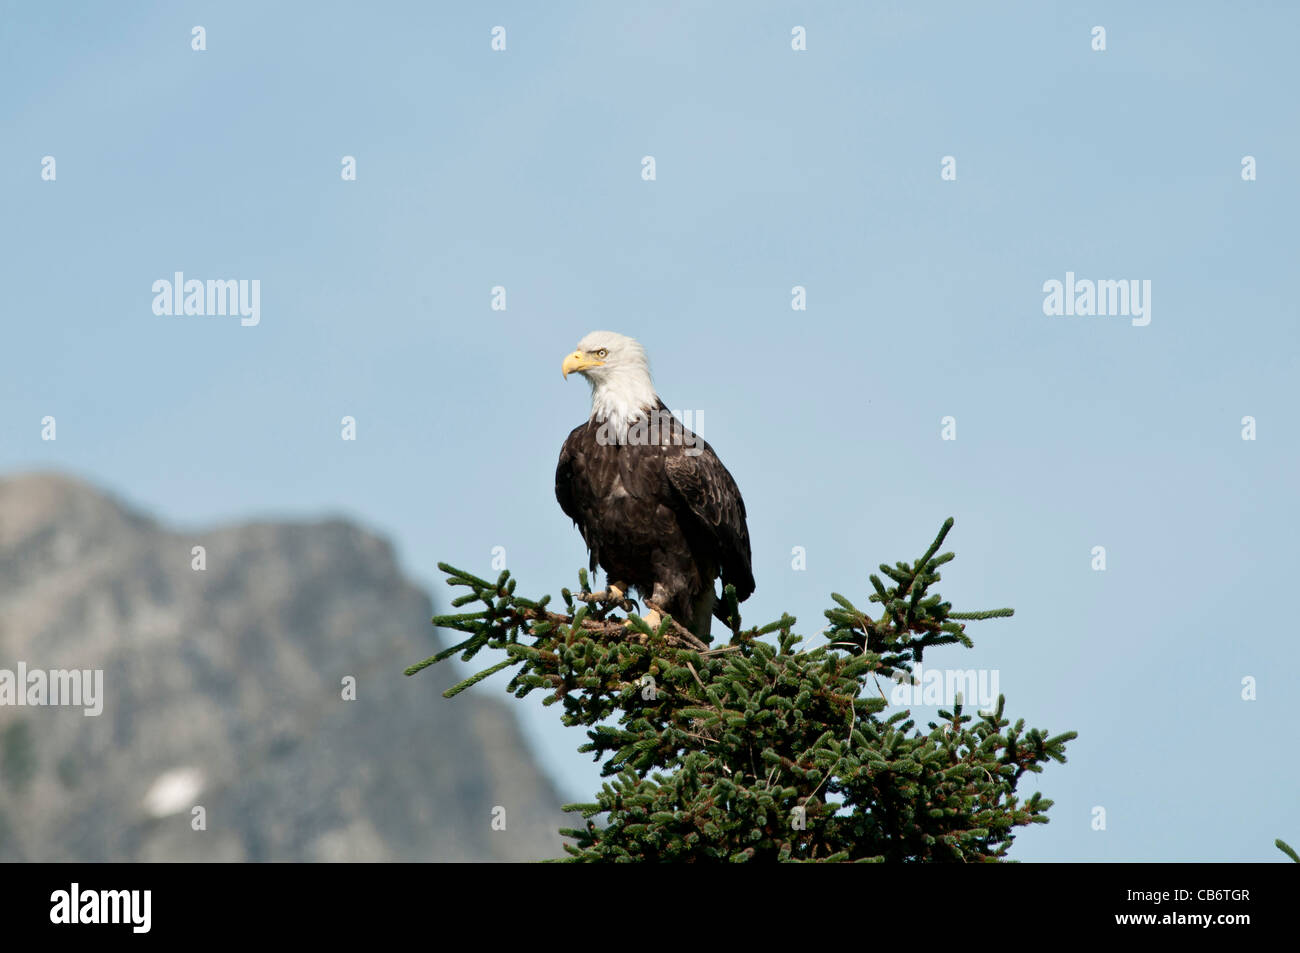 Stock photo of a bald eagle perched on top of a conifer tree. Stock Photo